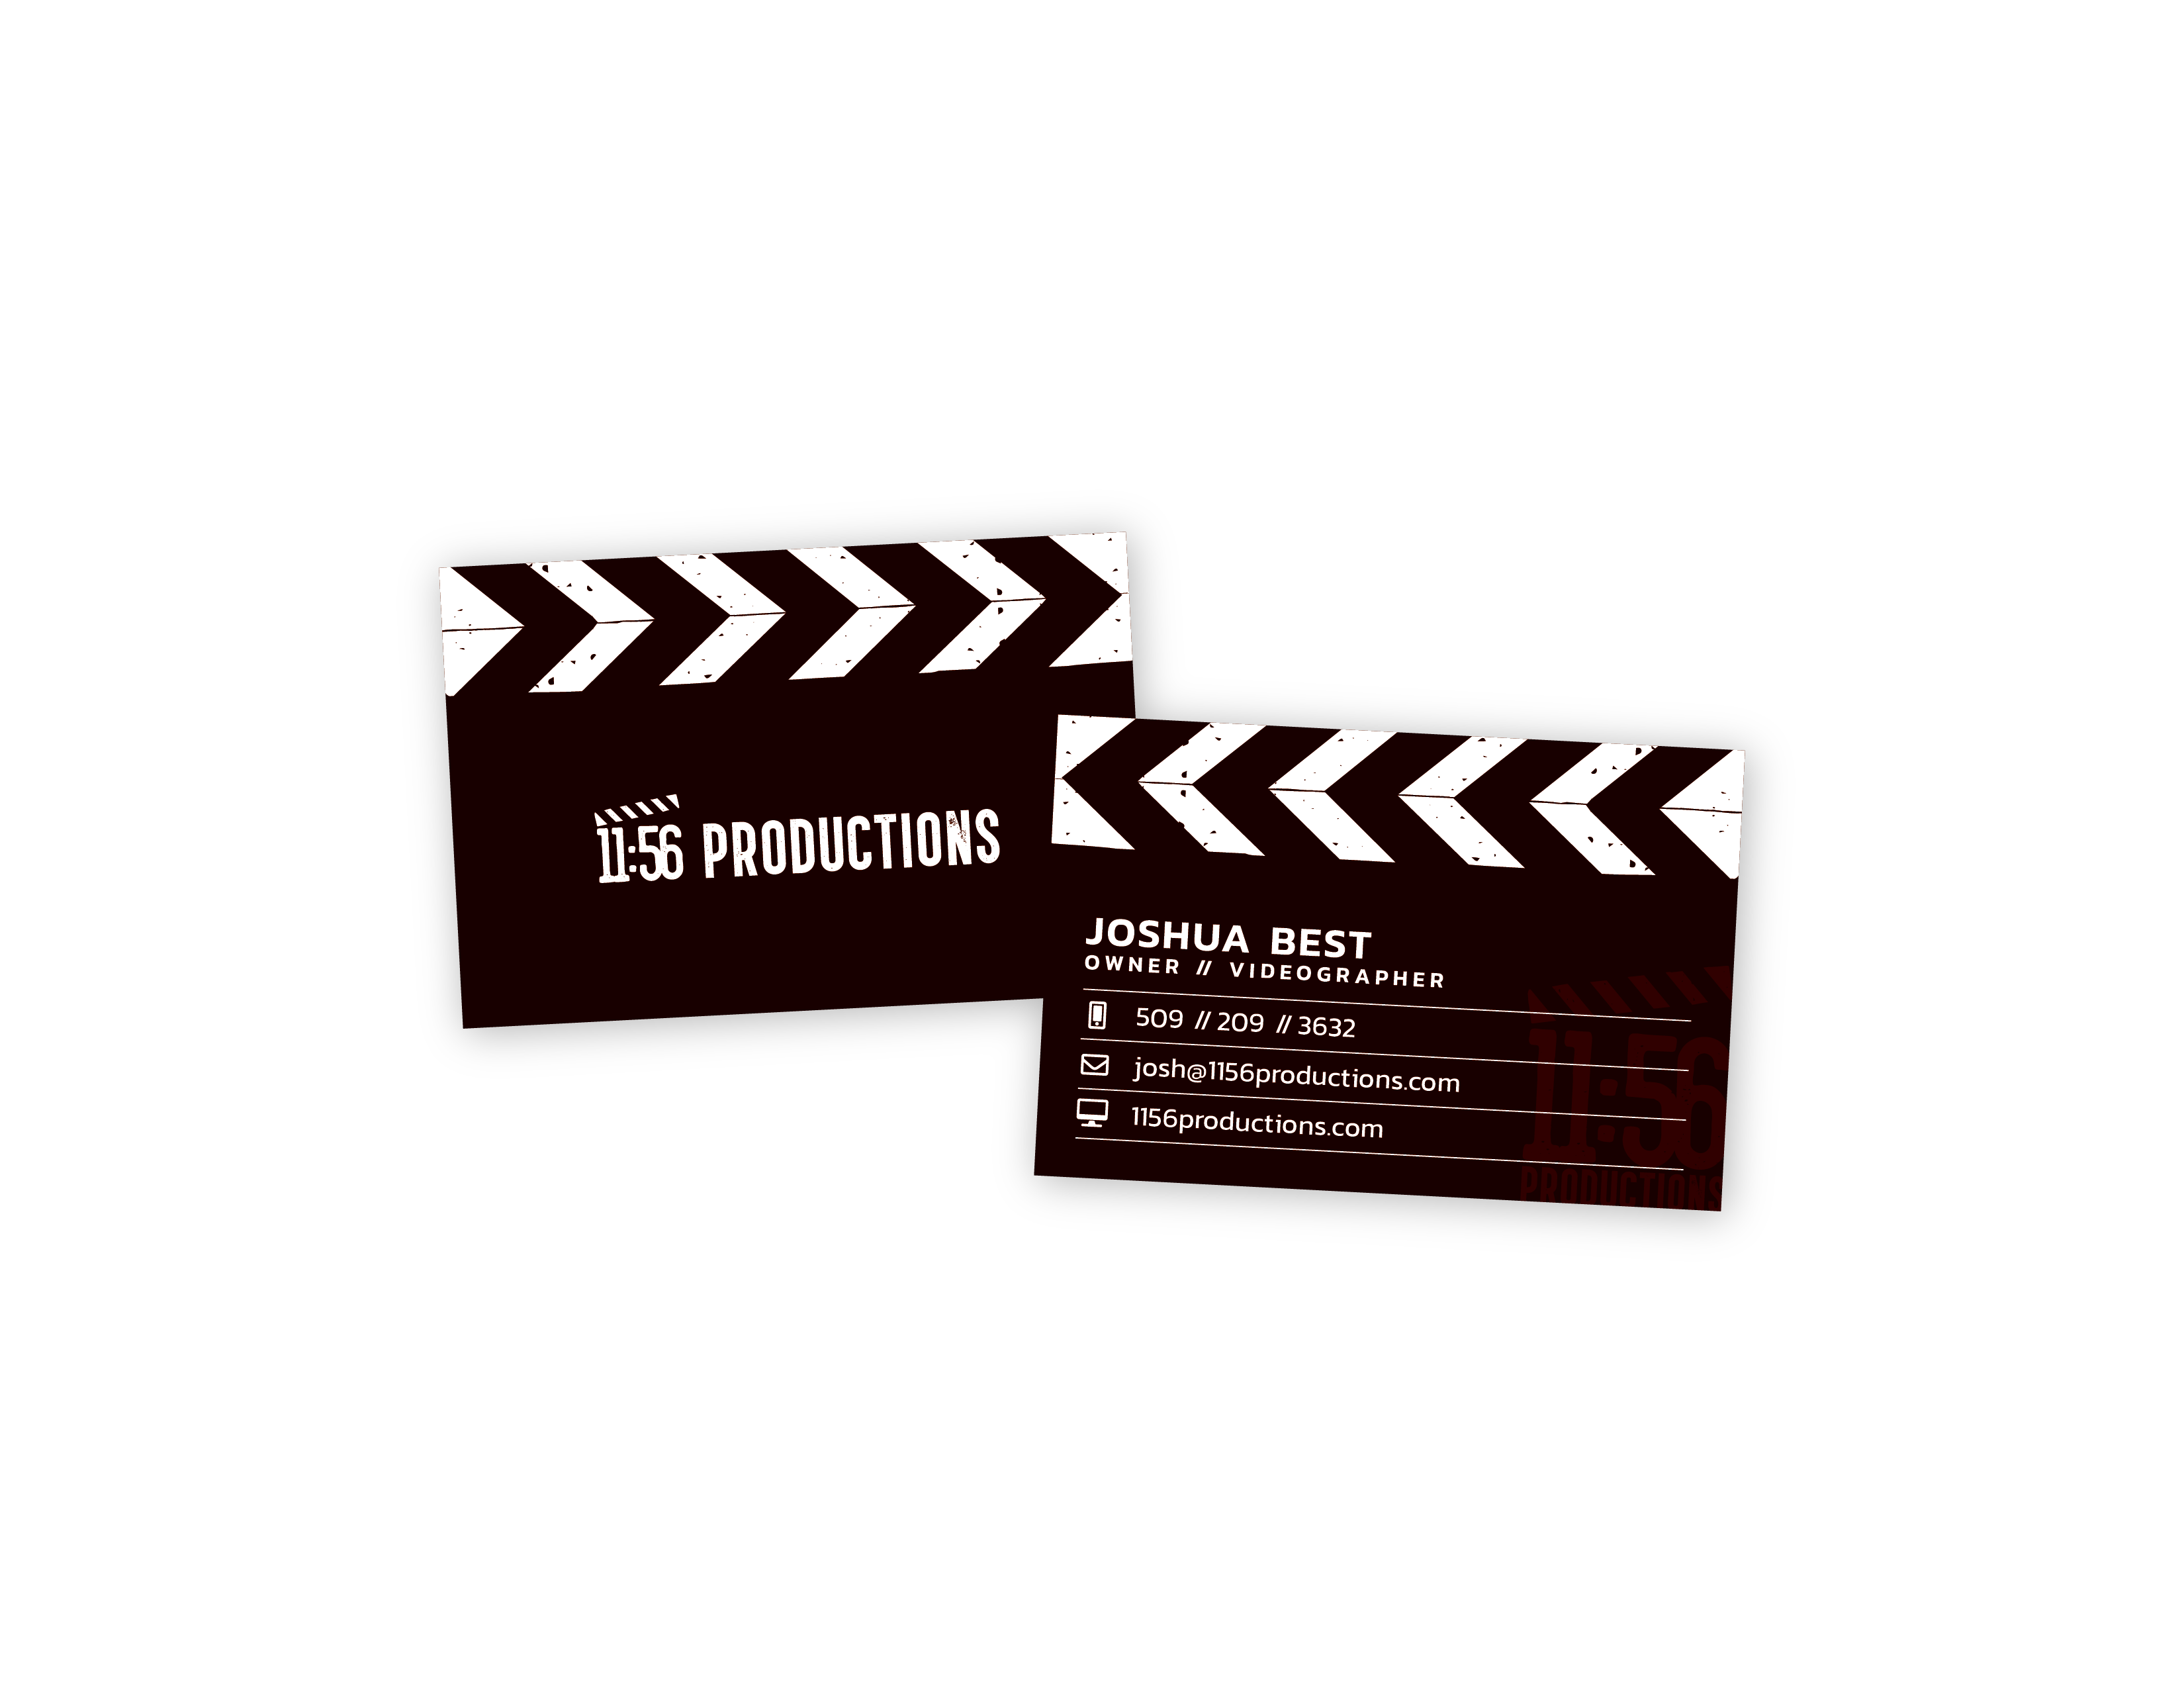 11:56 Productions business cards design